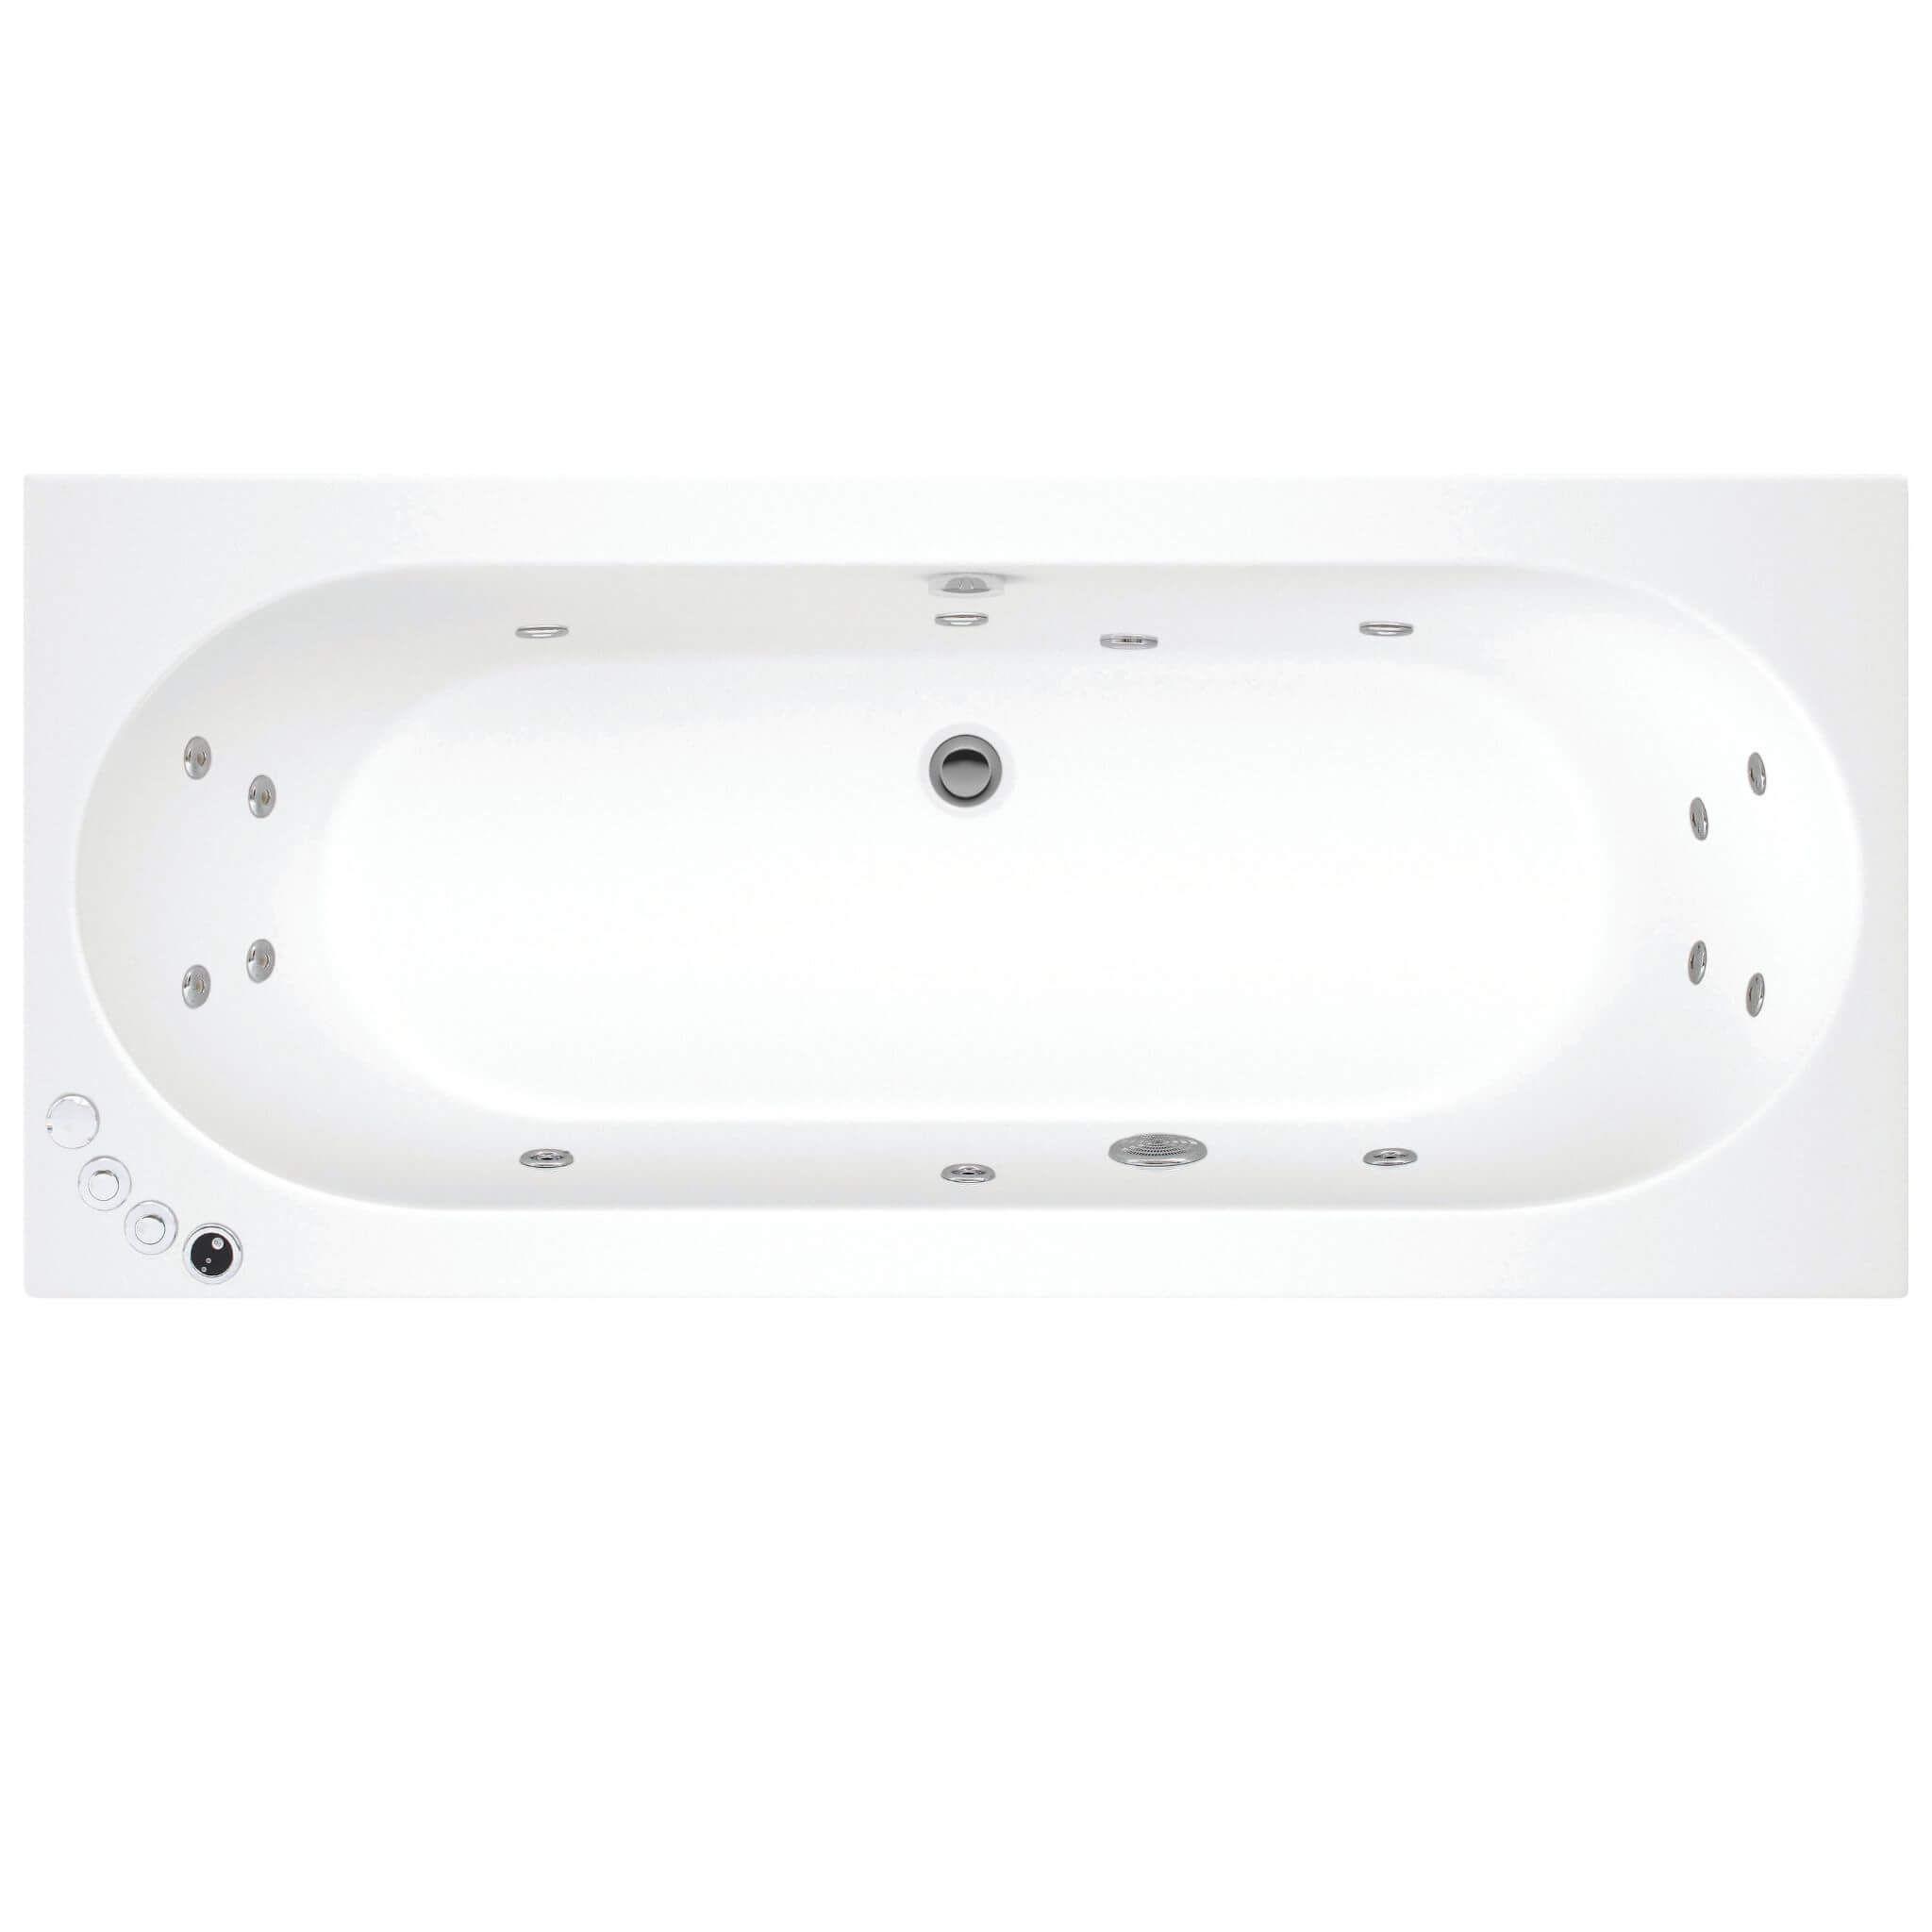 An image of Lisna Waters Maple 1800Mm X 800Mm Double Ended Whirlpool Bath 14 Jet Encore Sys....